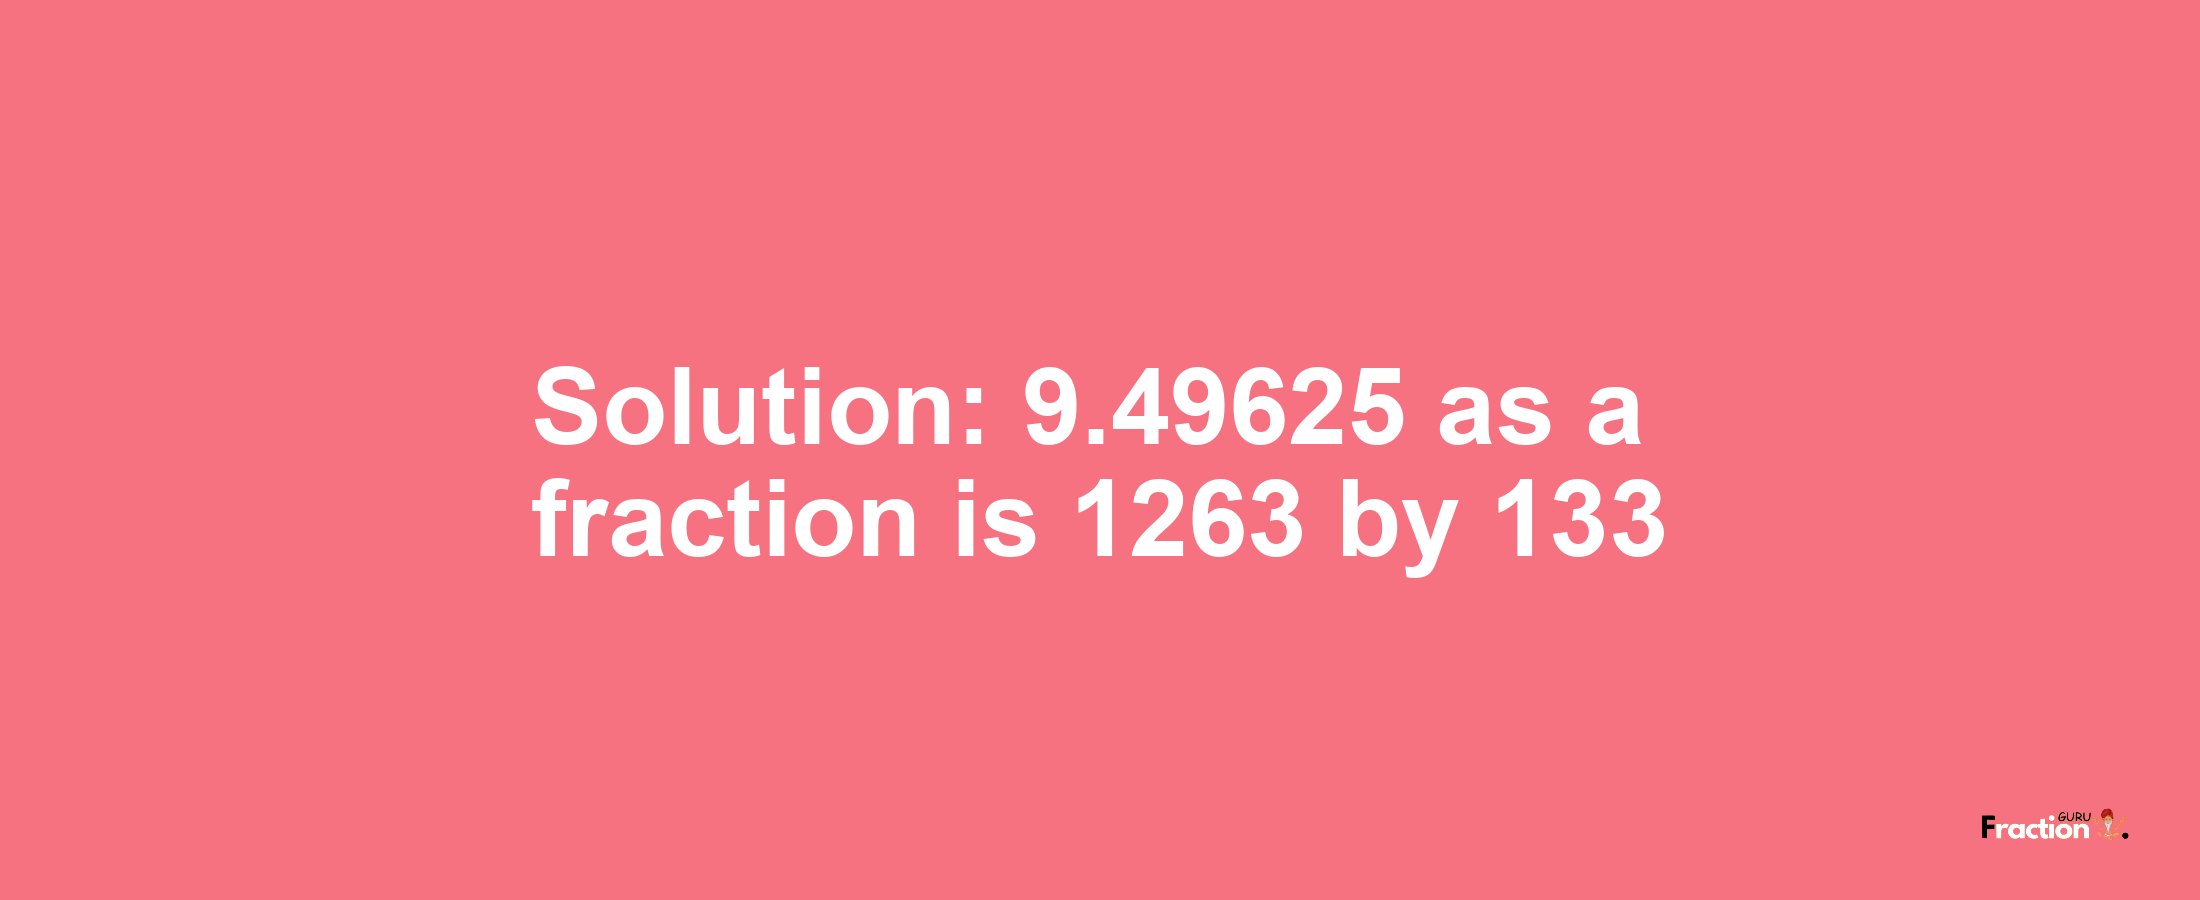 Solution:9.49625 as a fraction is 1263/133